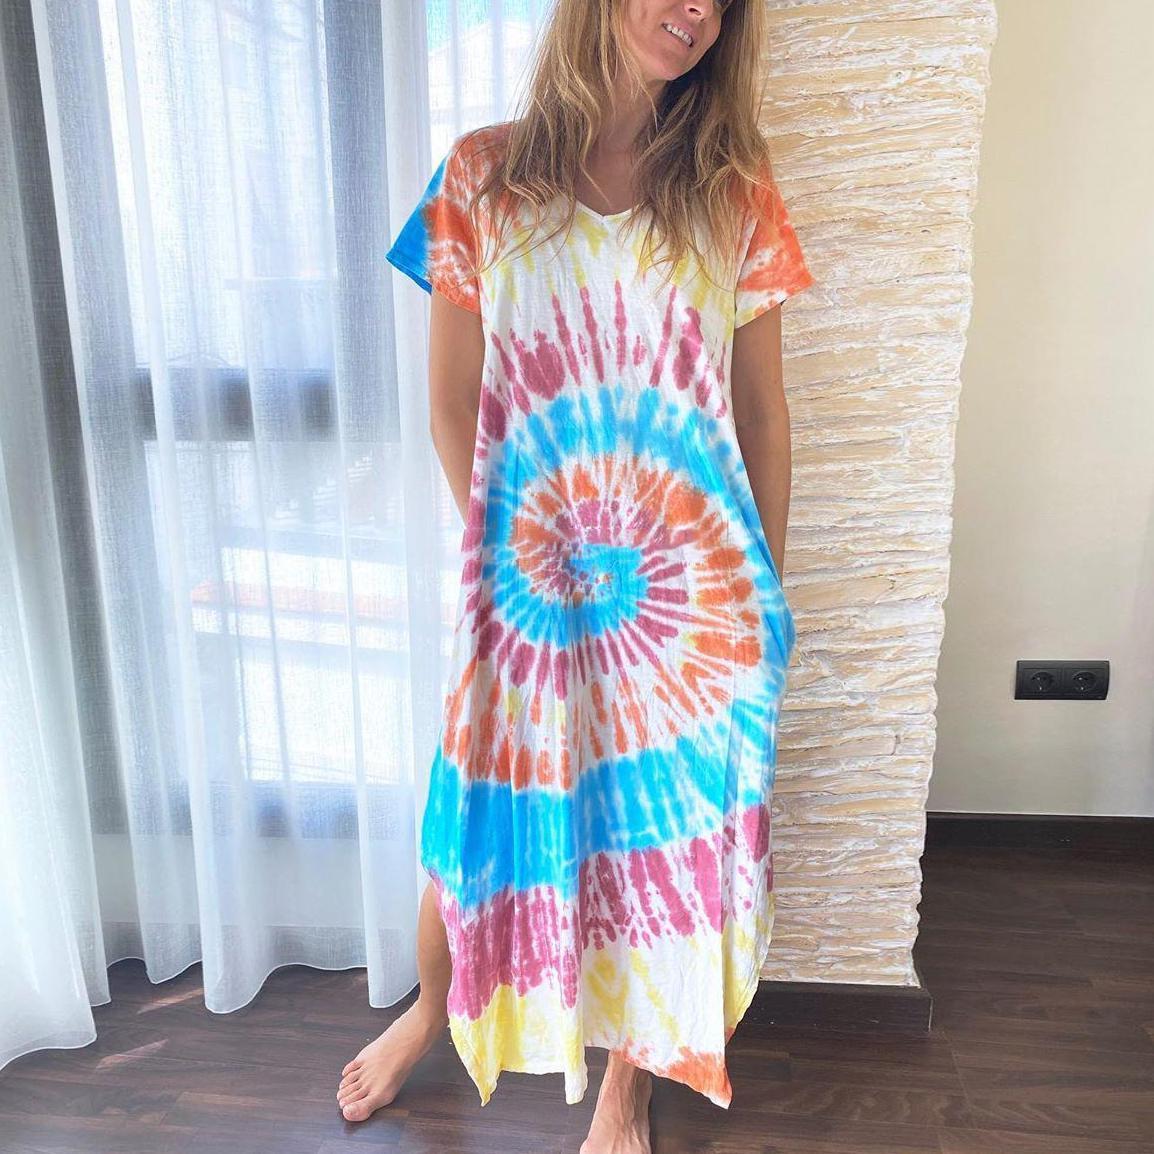 Spring / summer 2020 new cross border print dress Amazon stand alone hot loose multicolor dress